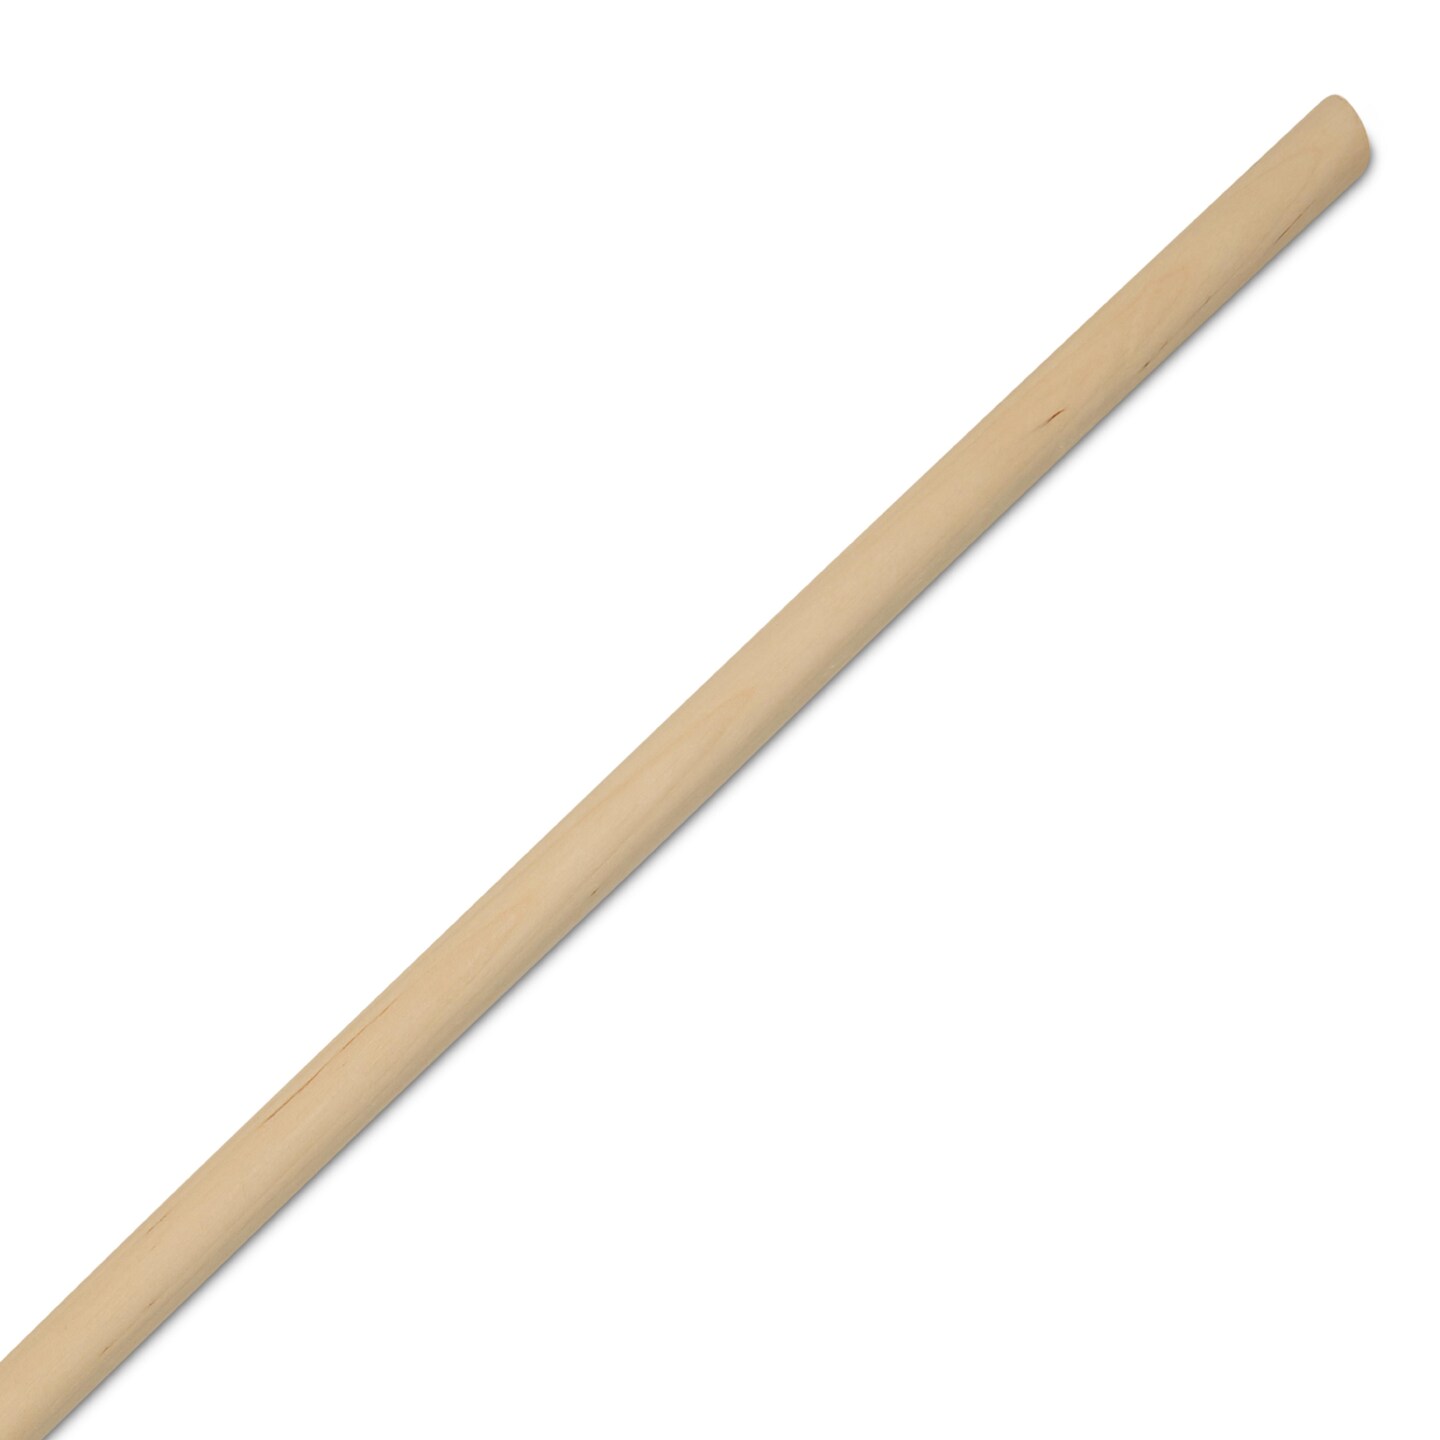 Dowel Rods Balsa Wood Round Dowels - 1 x 12 Inch Unfinished Balsa Hardwood  - for Crafts and DIYers - 25 Pieces by Binos